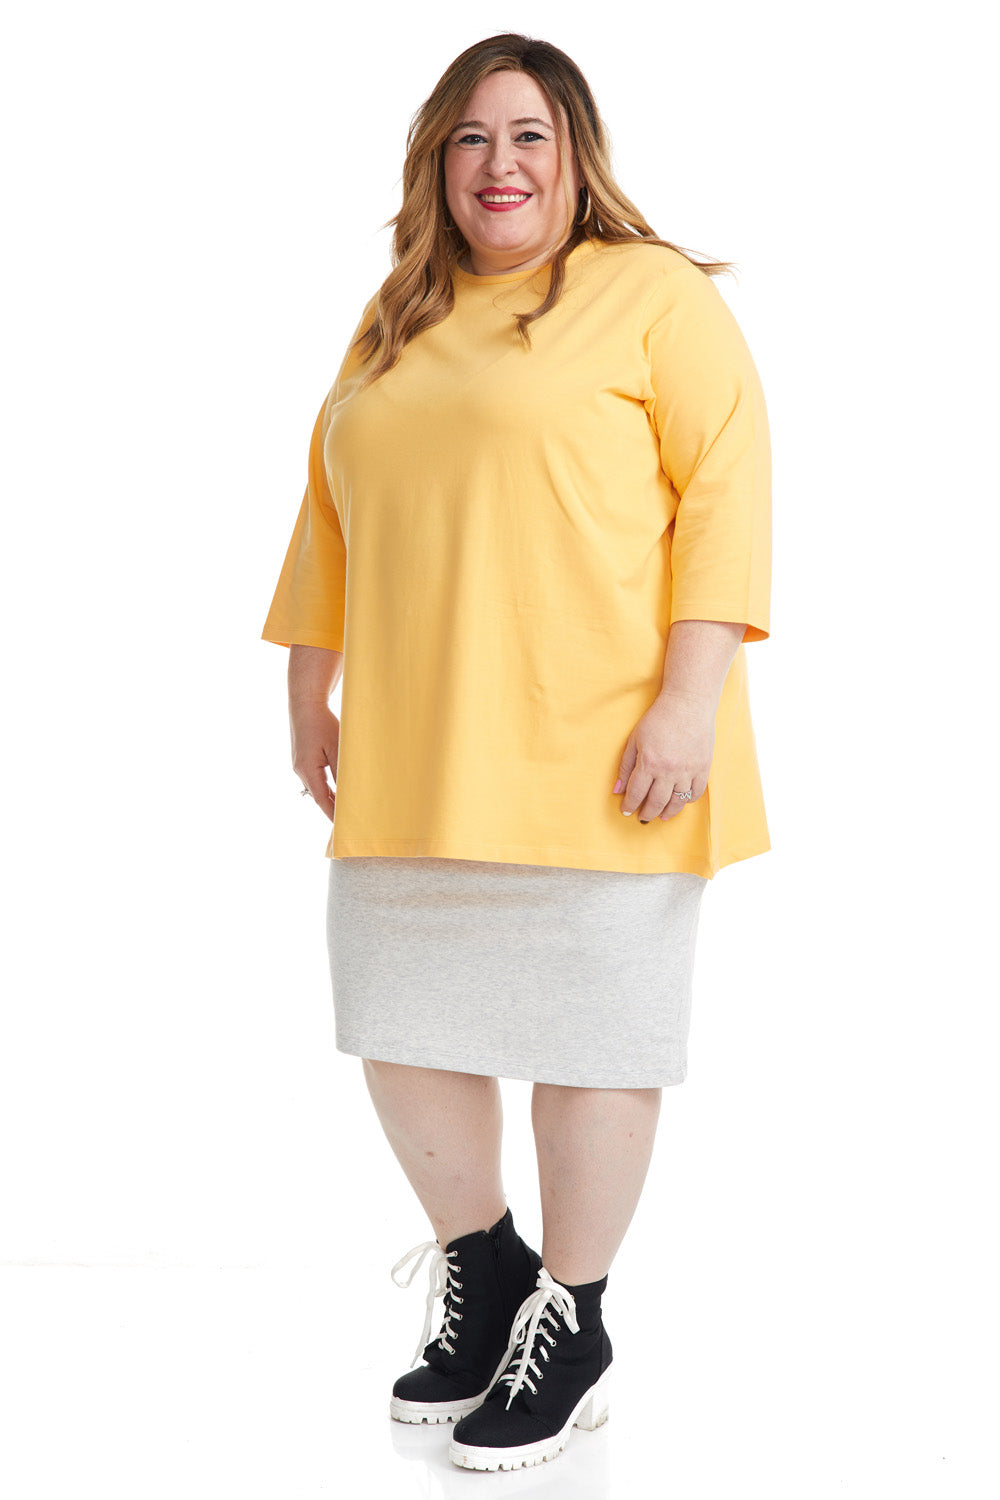 Plus Size Casual Yellow 3/4 sleeve baggy t-shirt for women